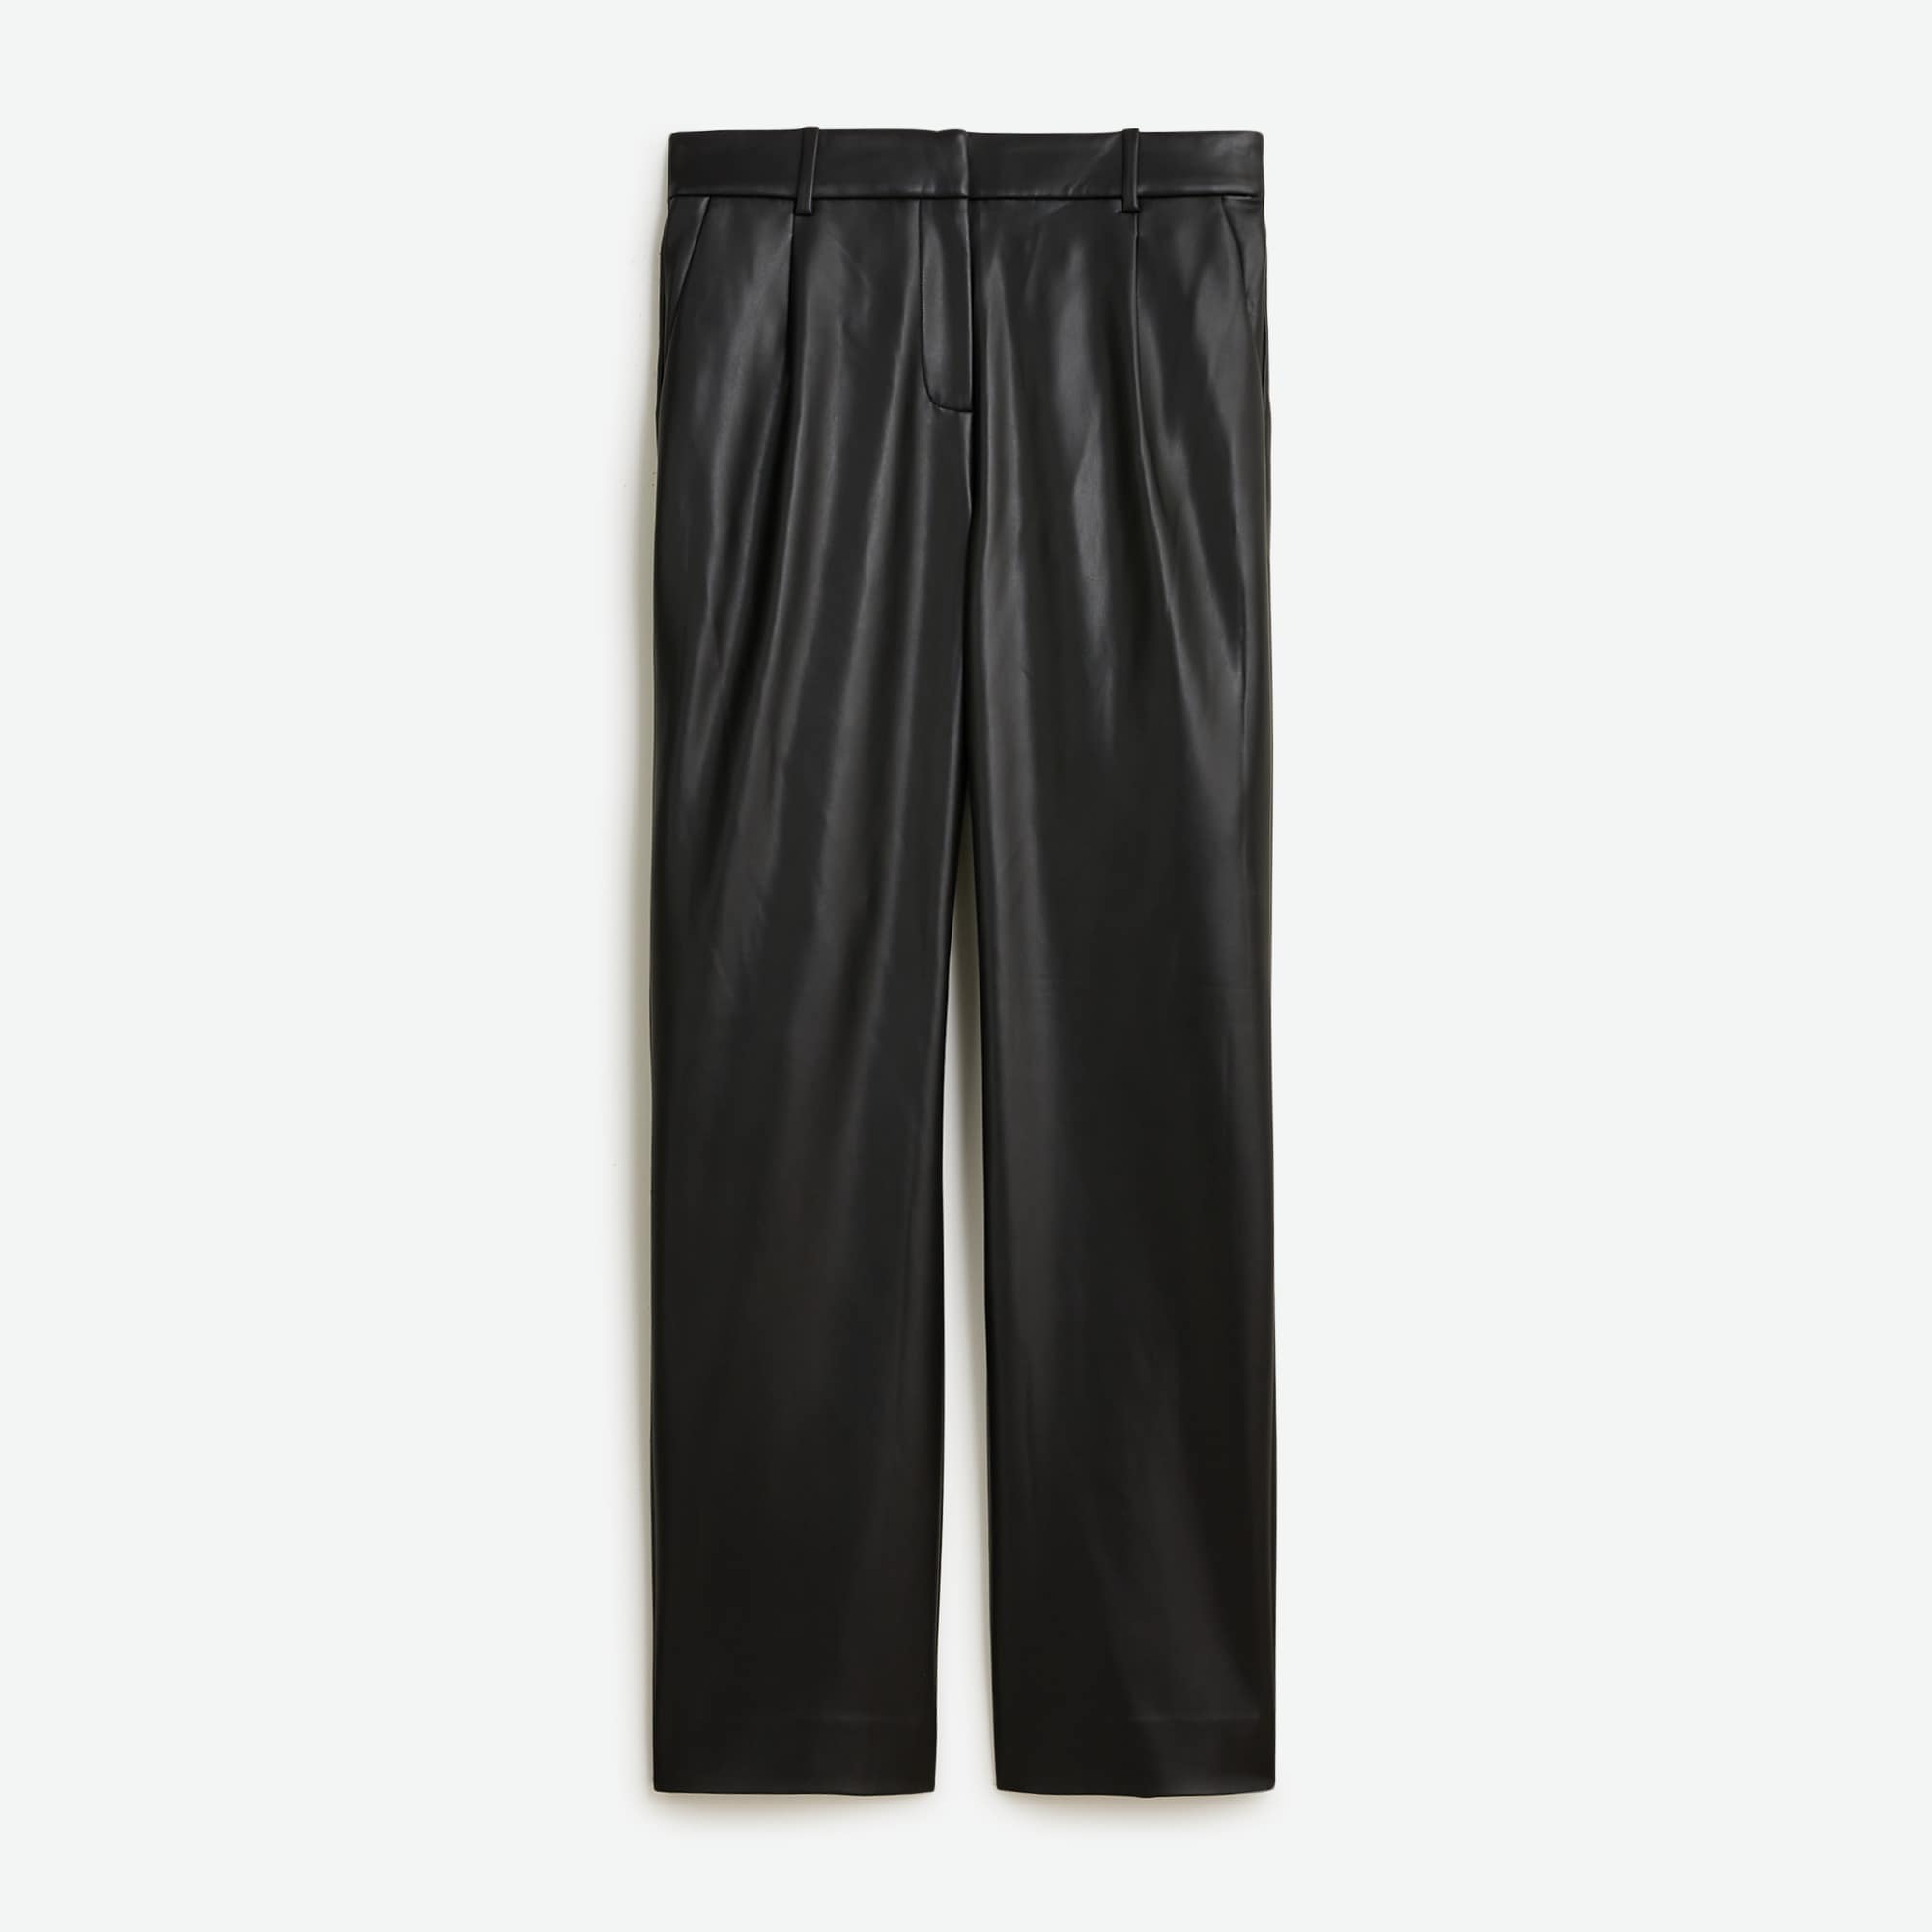  Straight-leg essential pant in faux leather